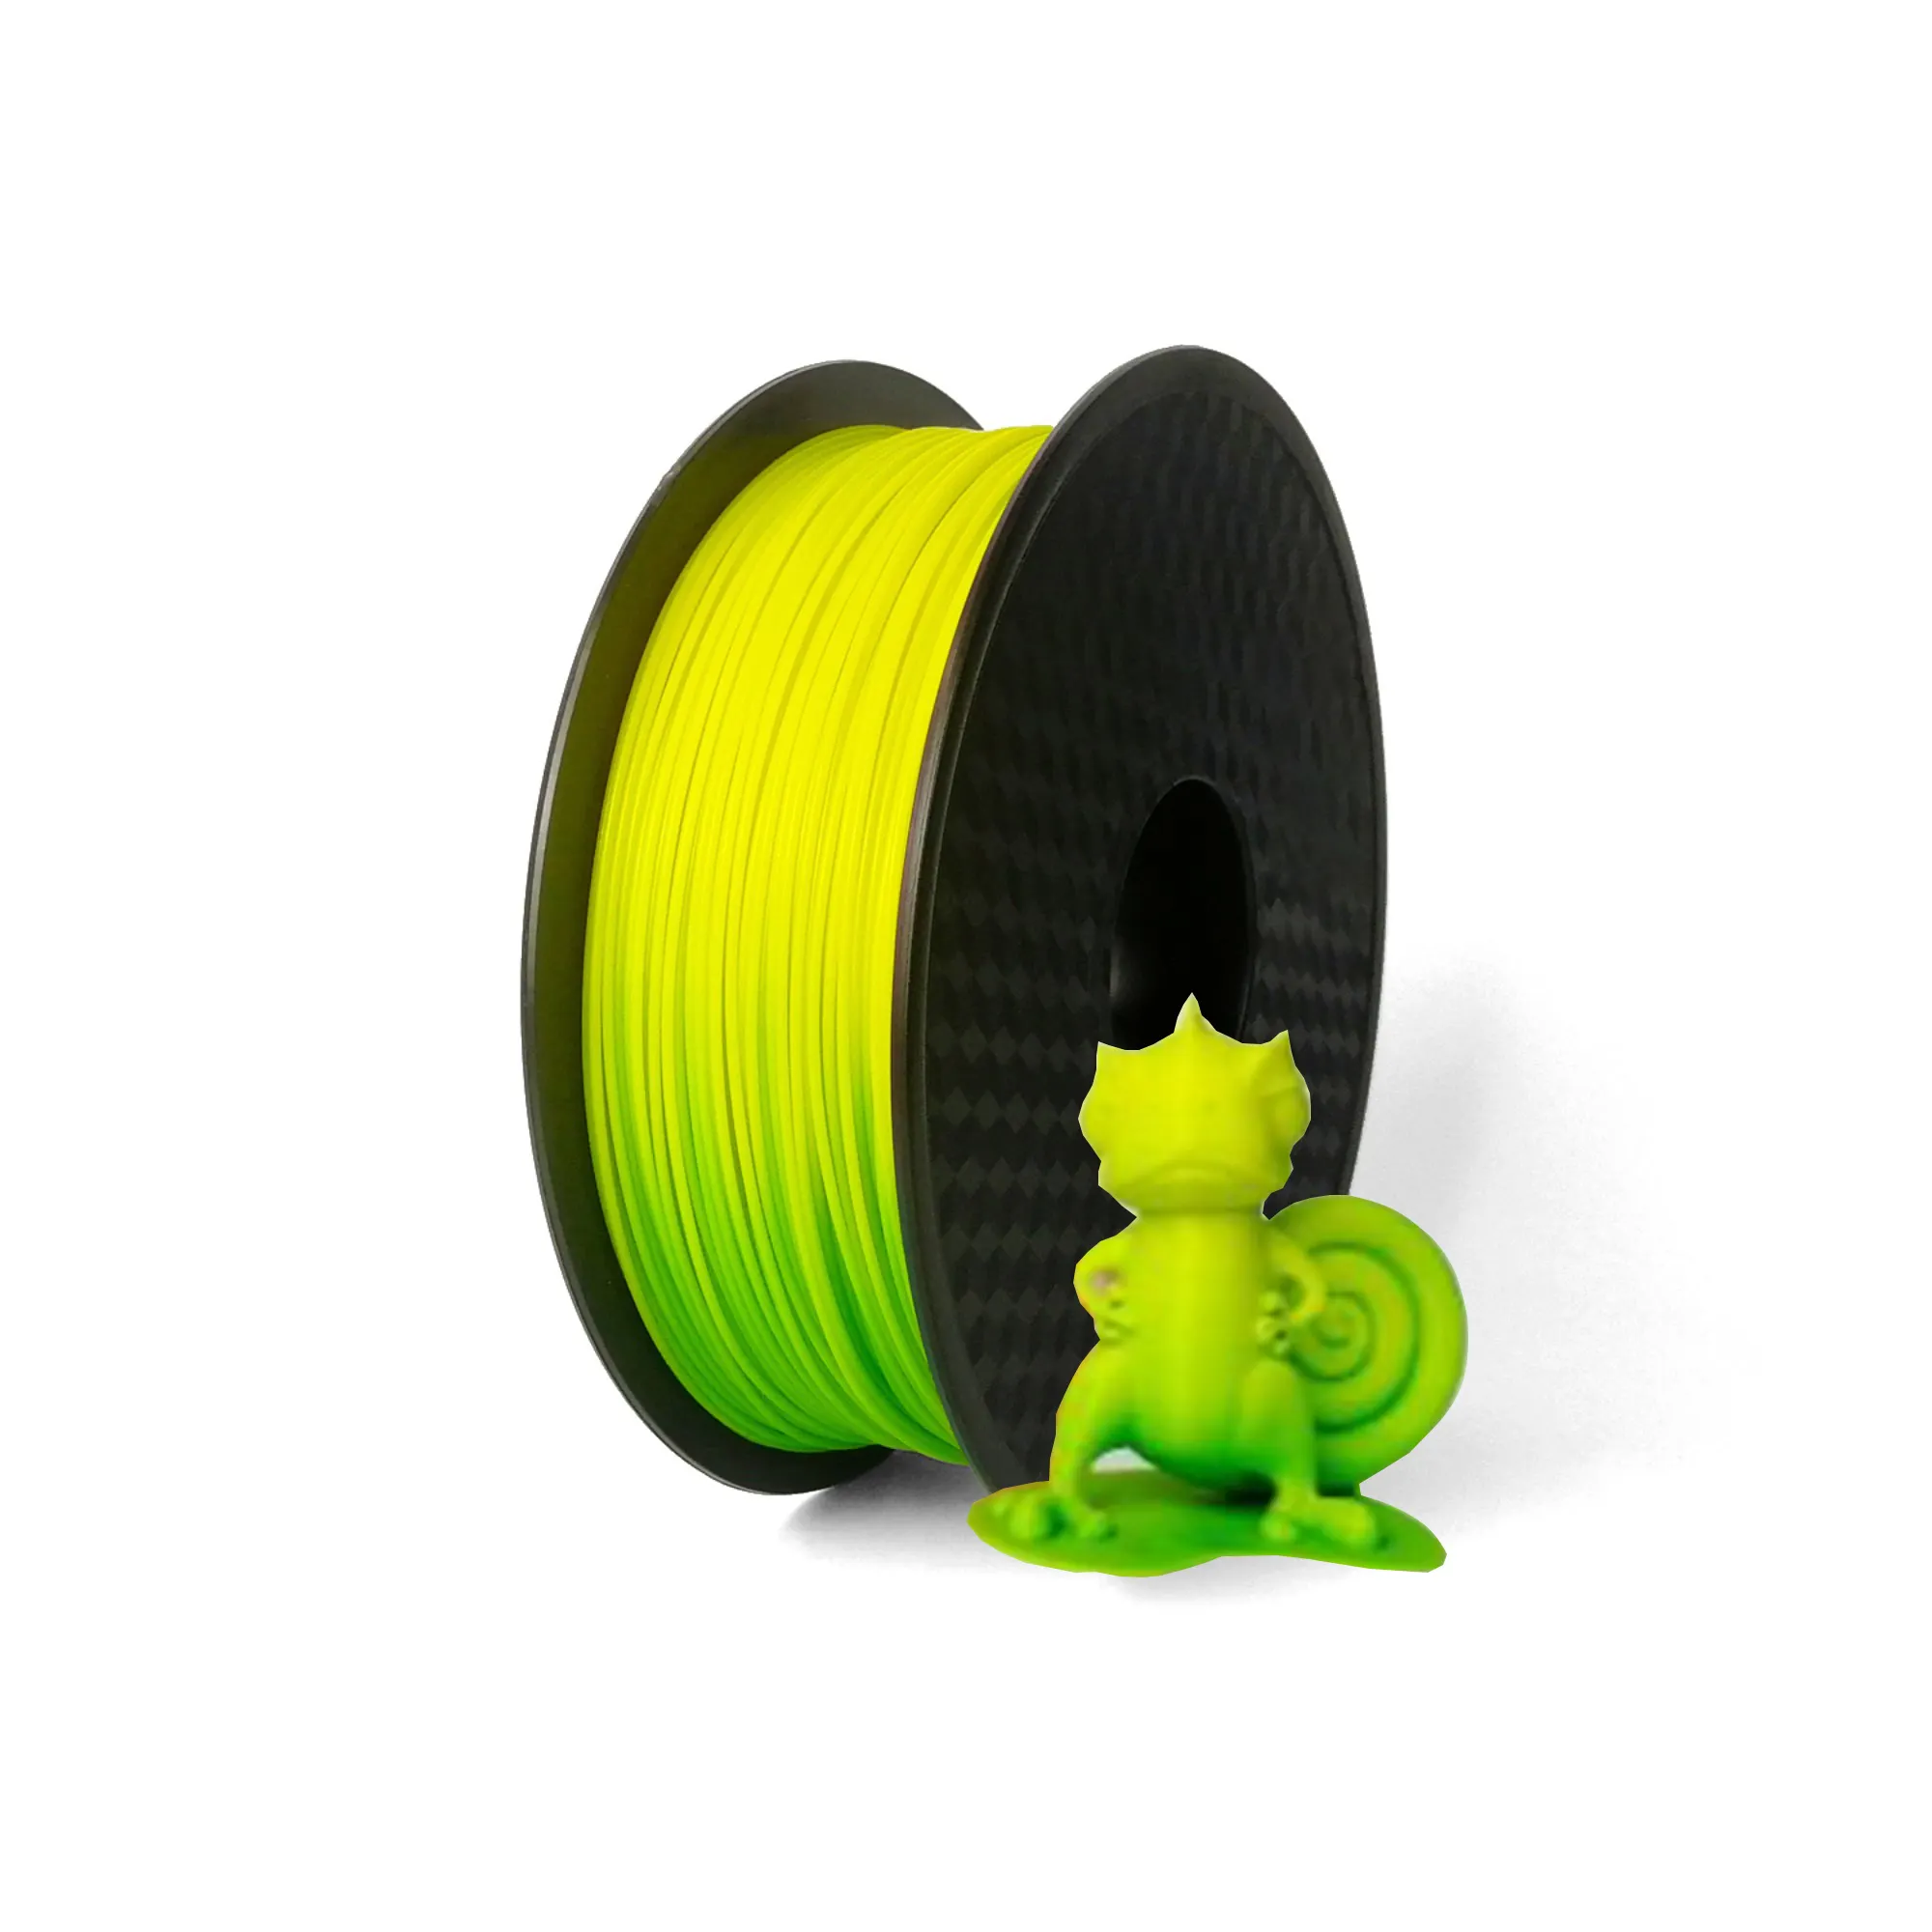 PLA filament 1.75mm red to white temp. color change filament 1.75mm 3d printer filament mix color